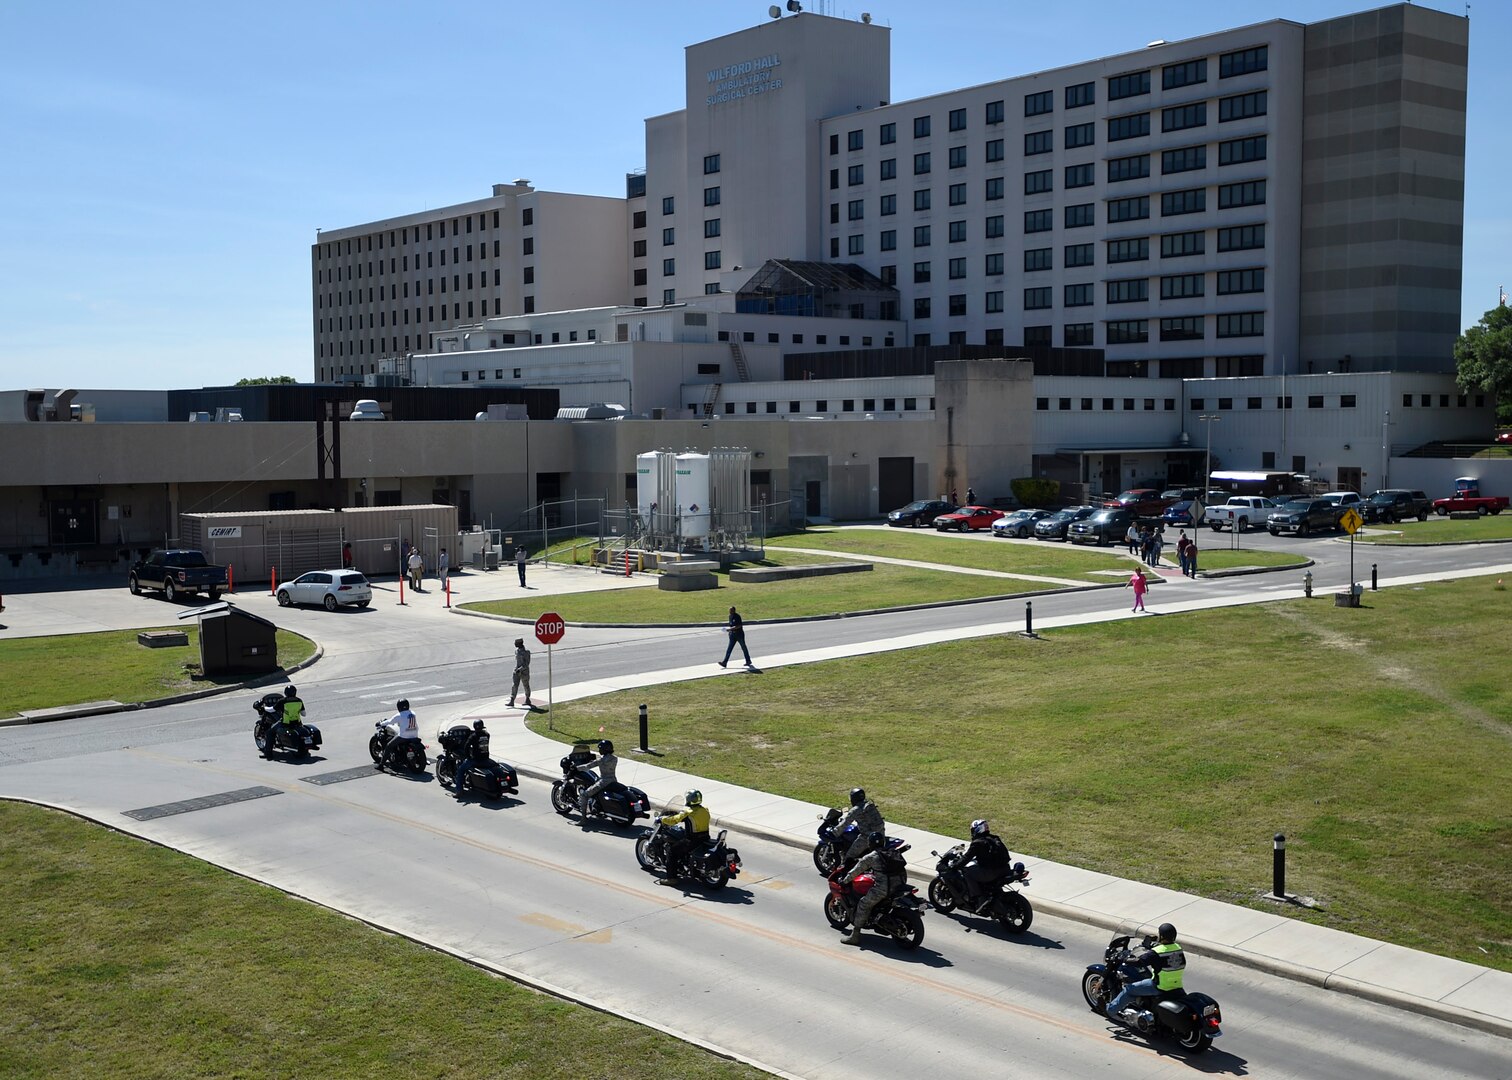 Motorcycle riders begin a 58-mile ride after the All Motorcycle Riders Call at the Wilford Hall Ambulatory Surgical Center April 7. The ride gave riders a chance to practice proper riding skills at slower speeds. (U.S. Air Force photo/Staff Sgt. Kevin Iinuma)